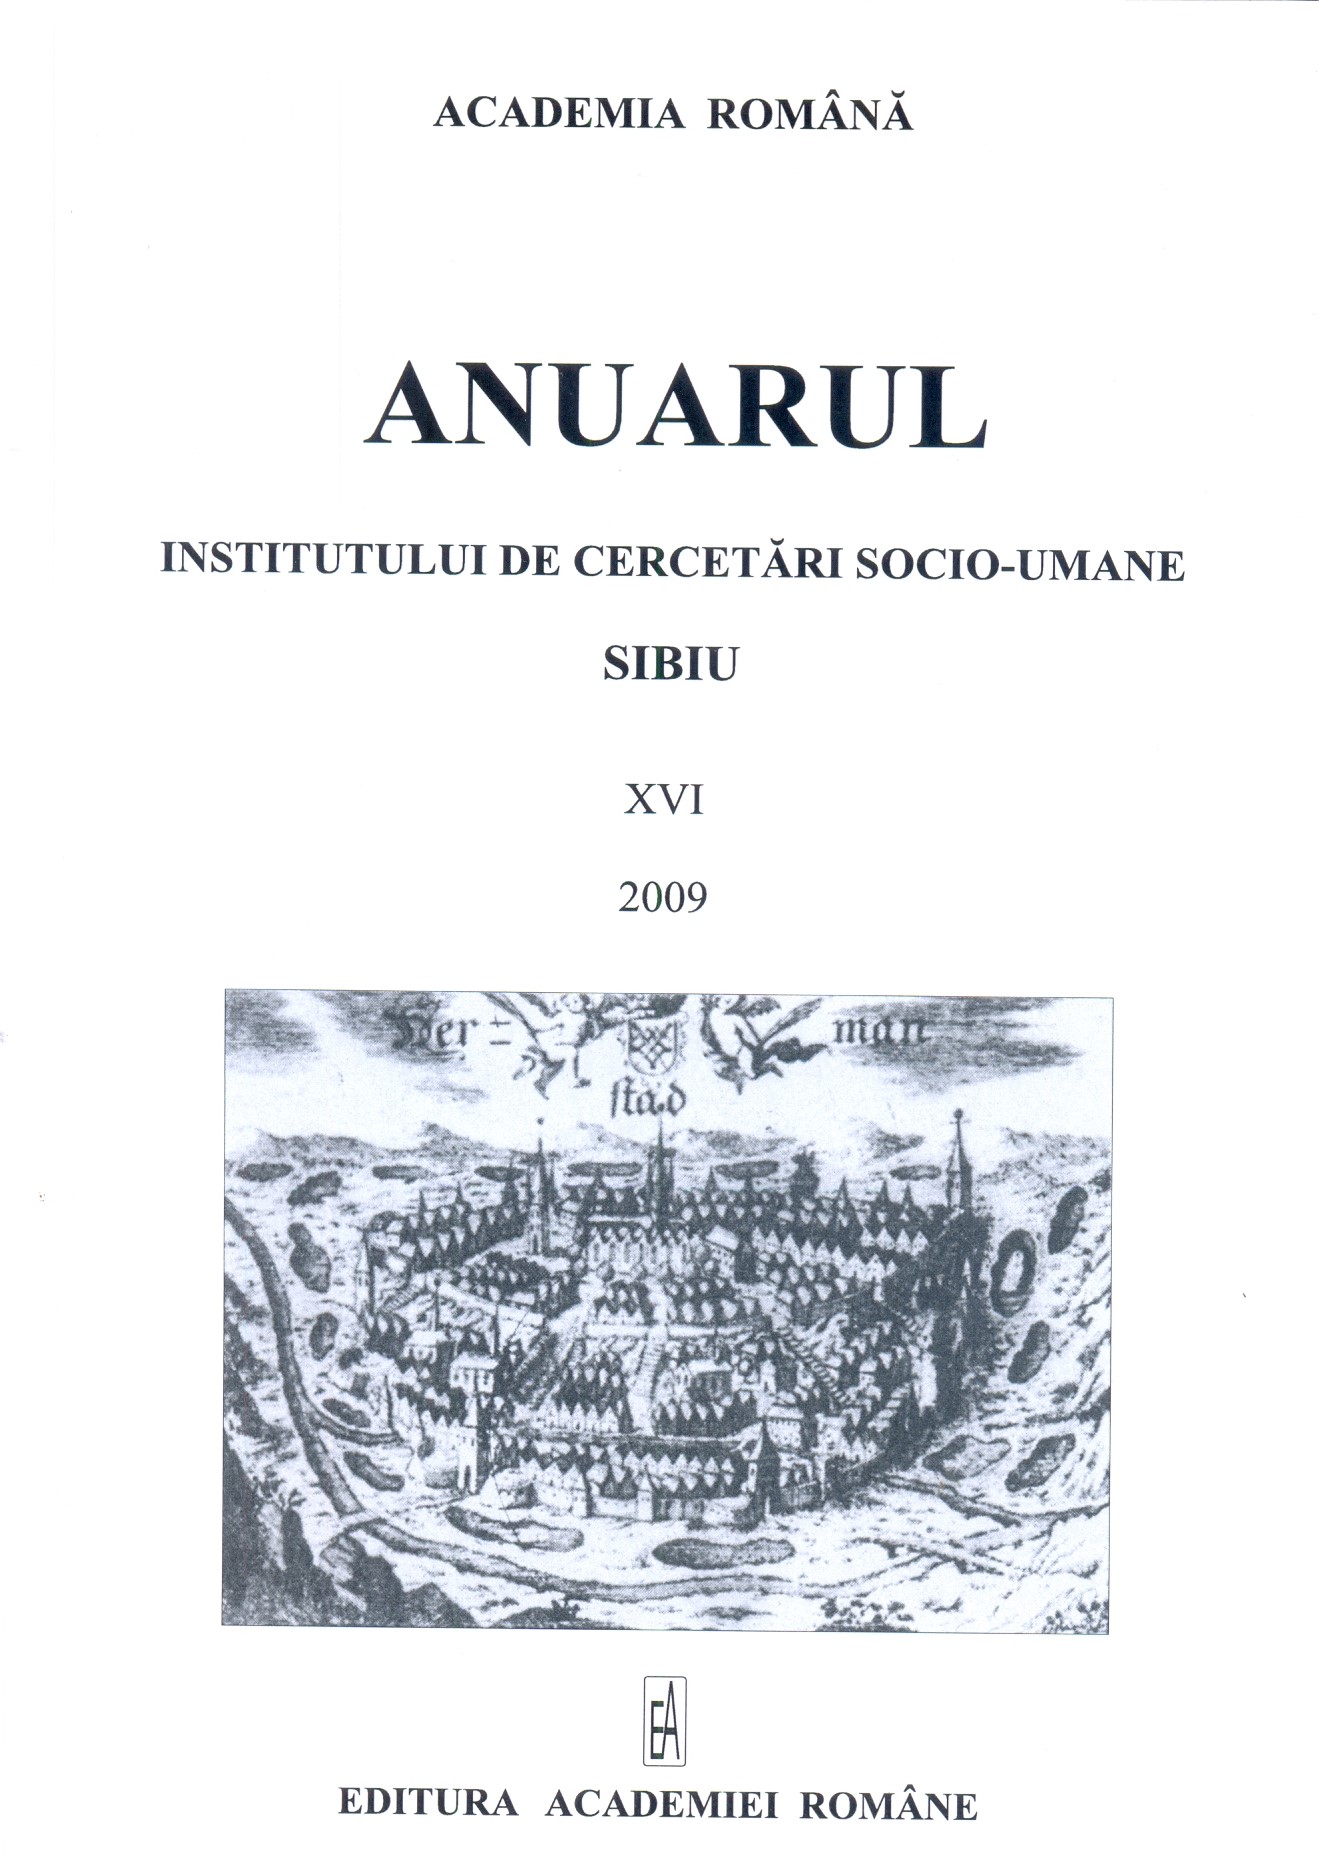 THE UNIFICATION OF THE ROMANIAN PRINCIPALITIES - THE NATIONAL IDEAL Cover Image